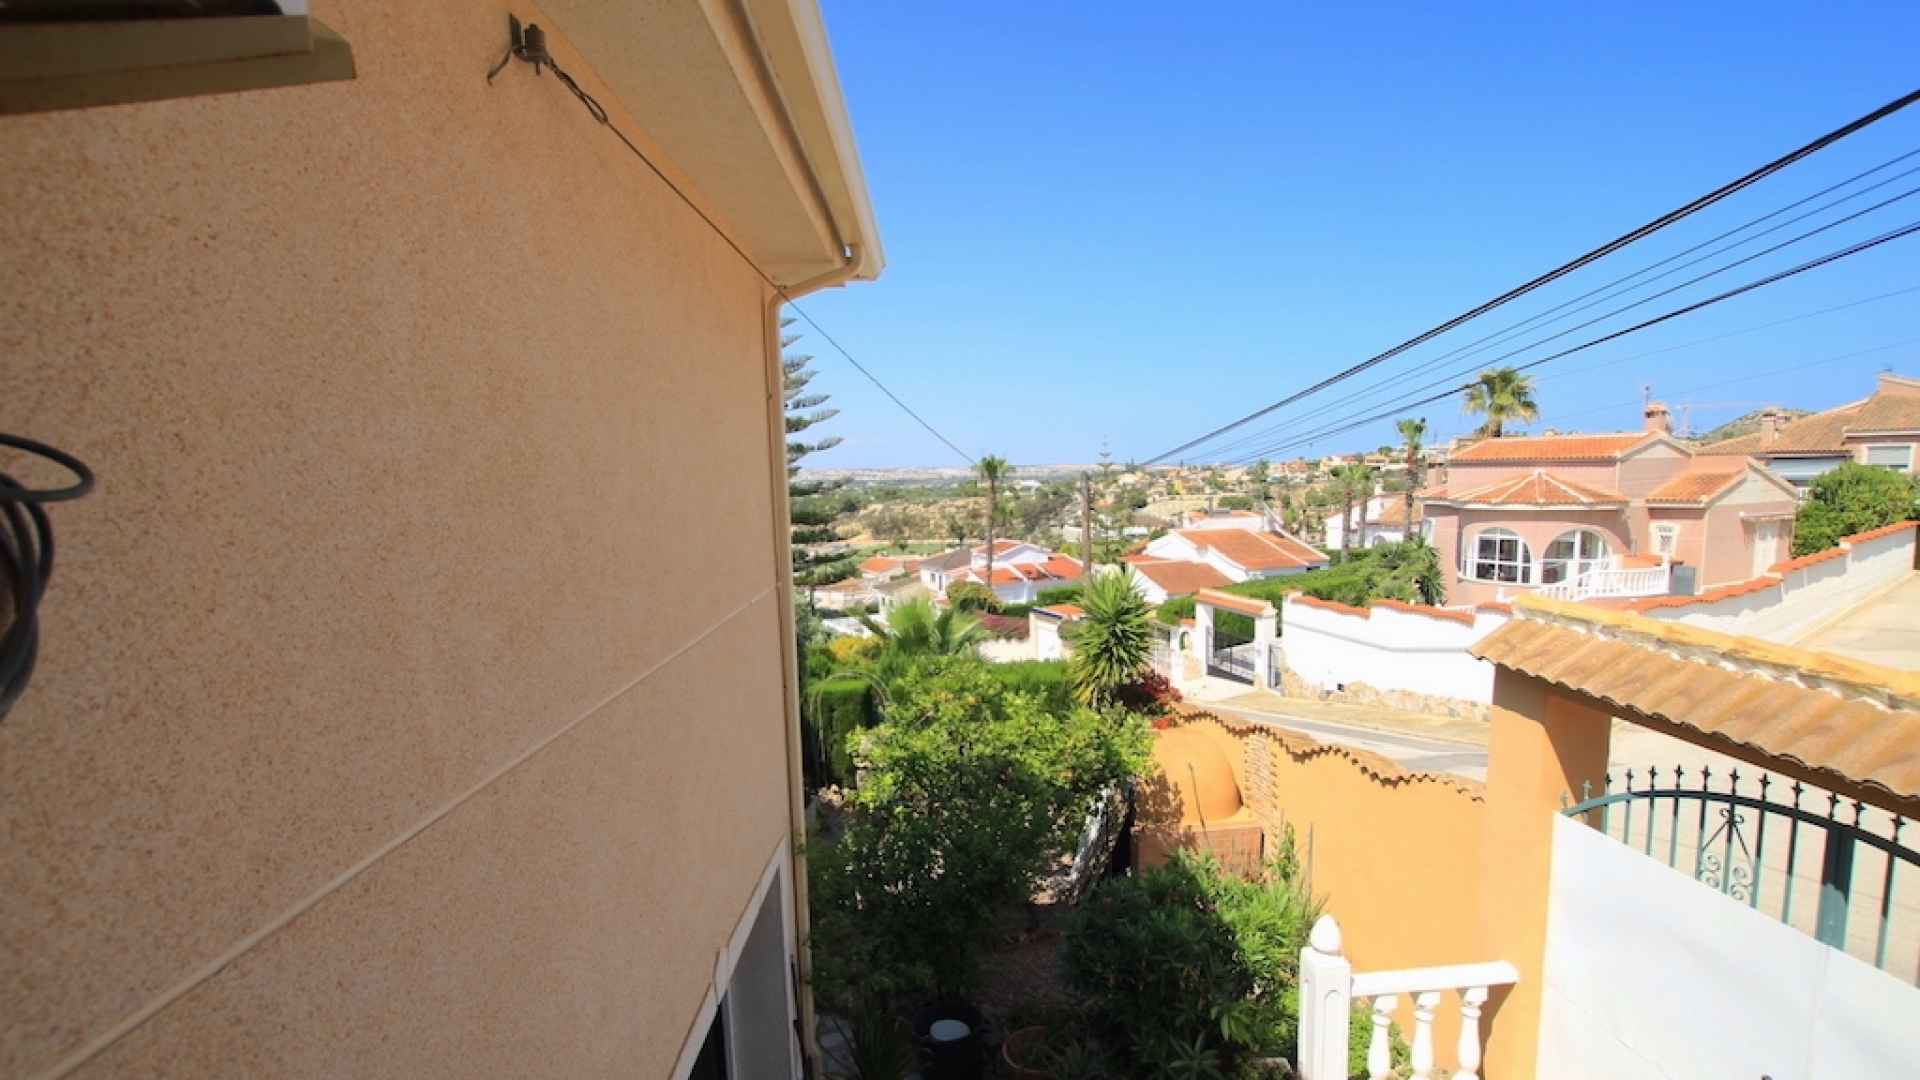 48133_spacious_210sqm_detached_villa_with_internal_garage___private_pool_260623093701_img_5913